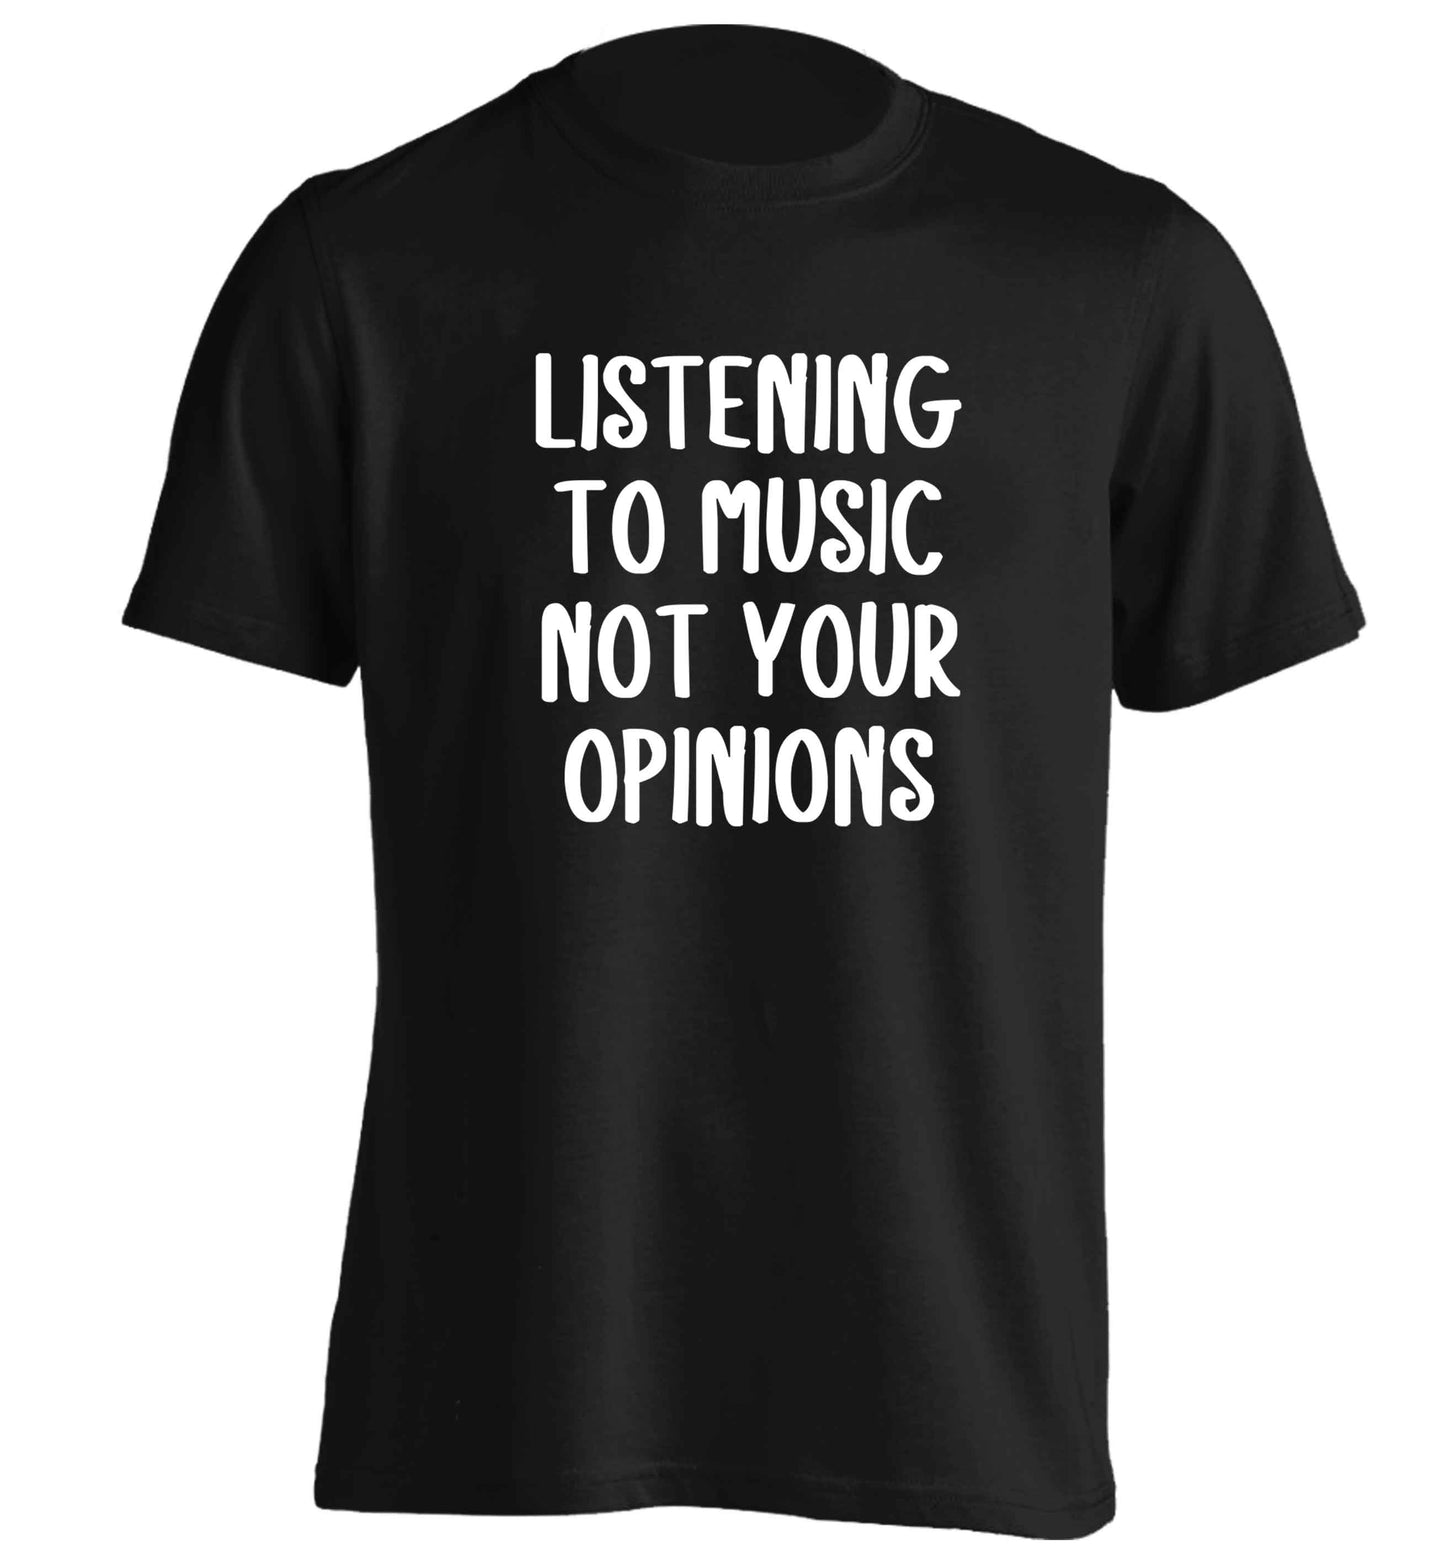 Listening to music not your opinions adults unisex black Tshirt 2XL